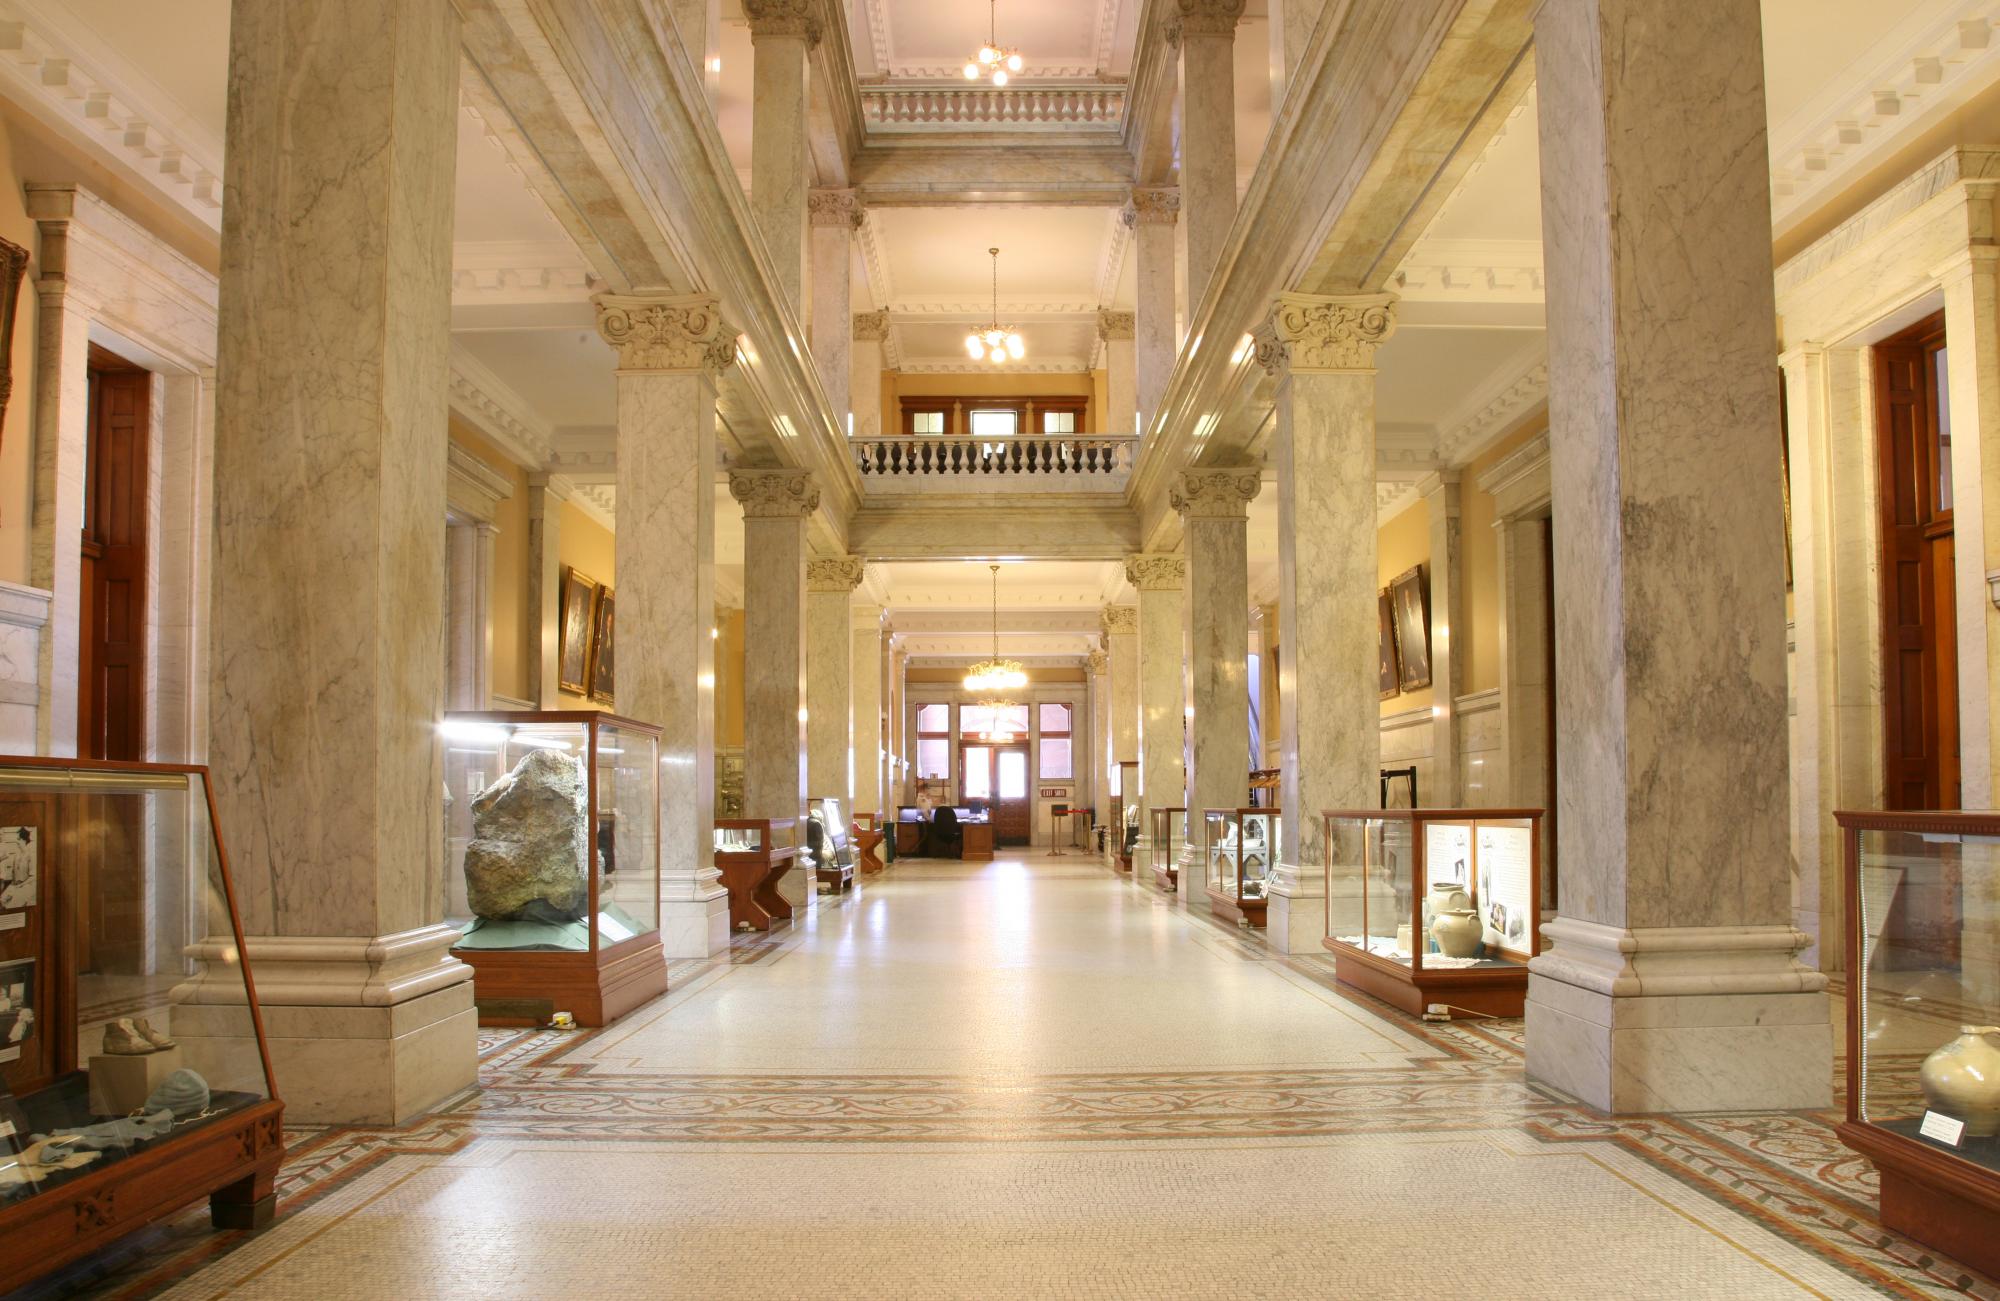 West wing of the Legislative Building with Community Exhibits.